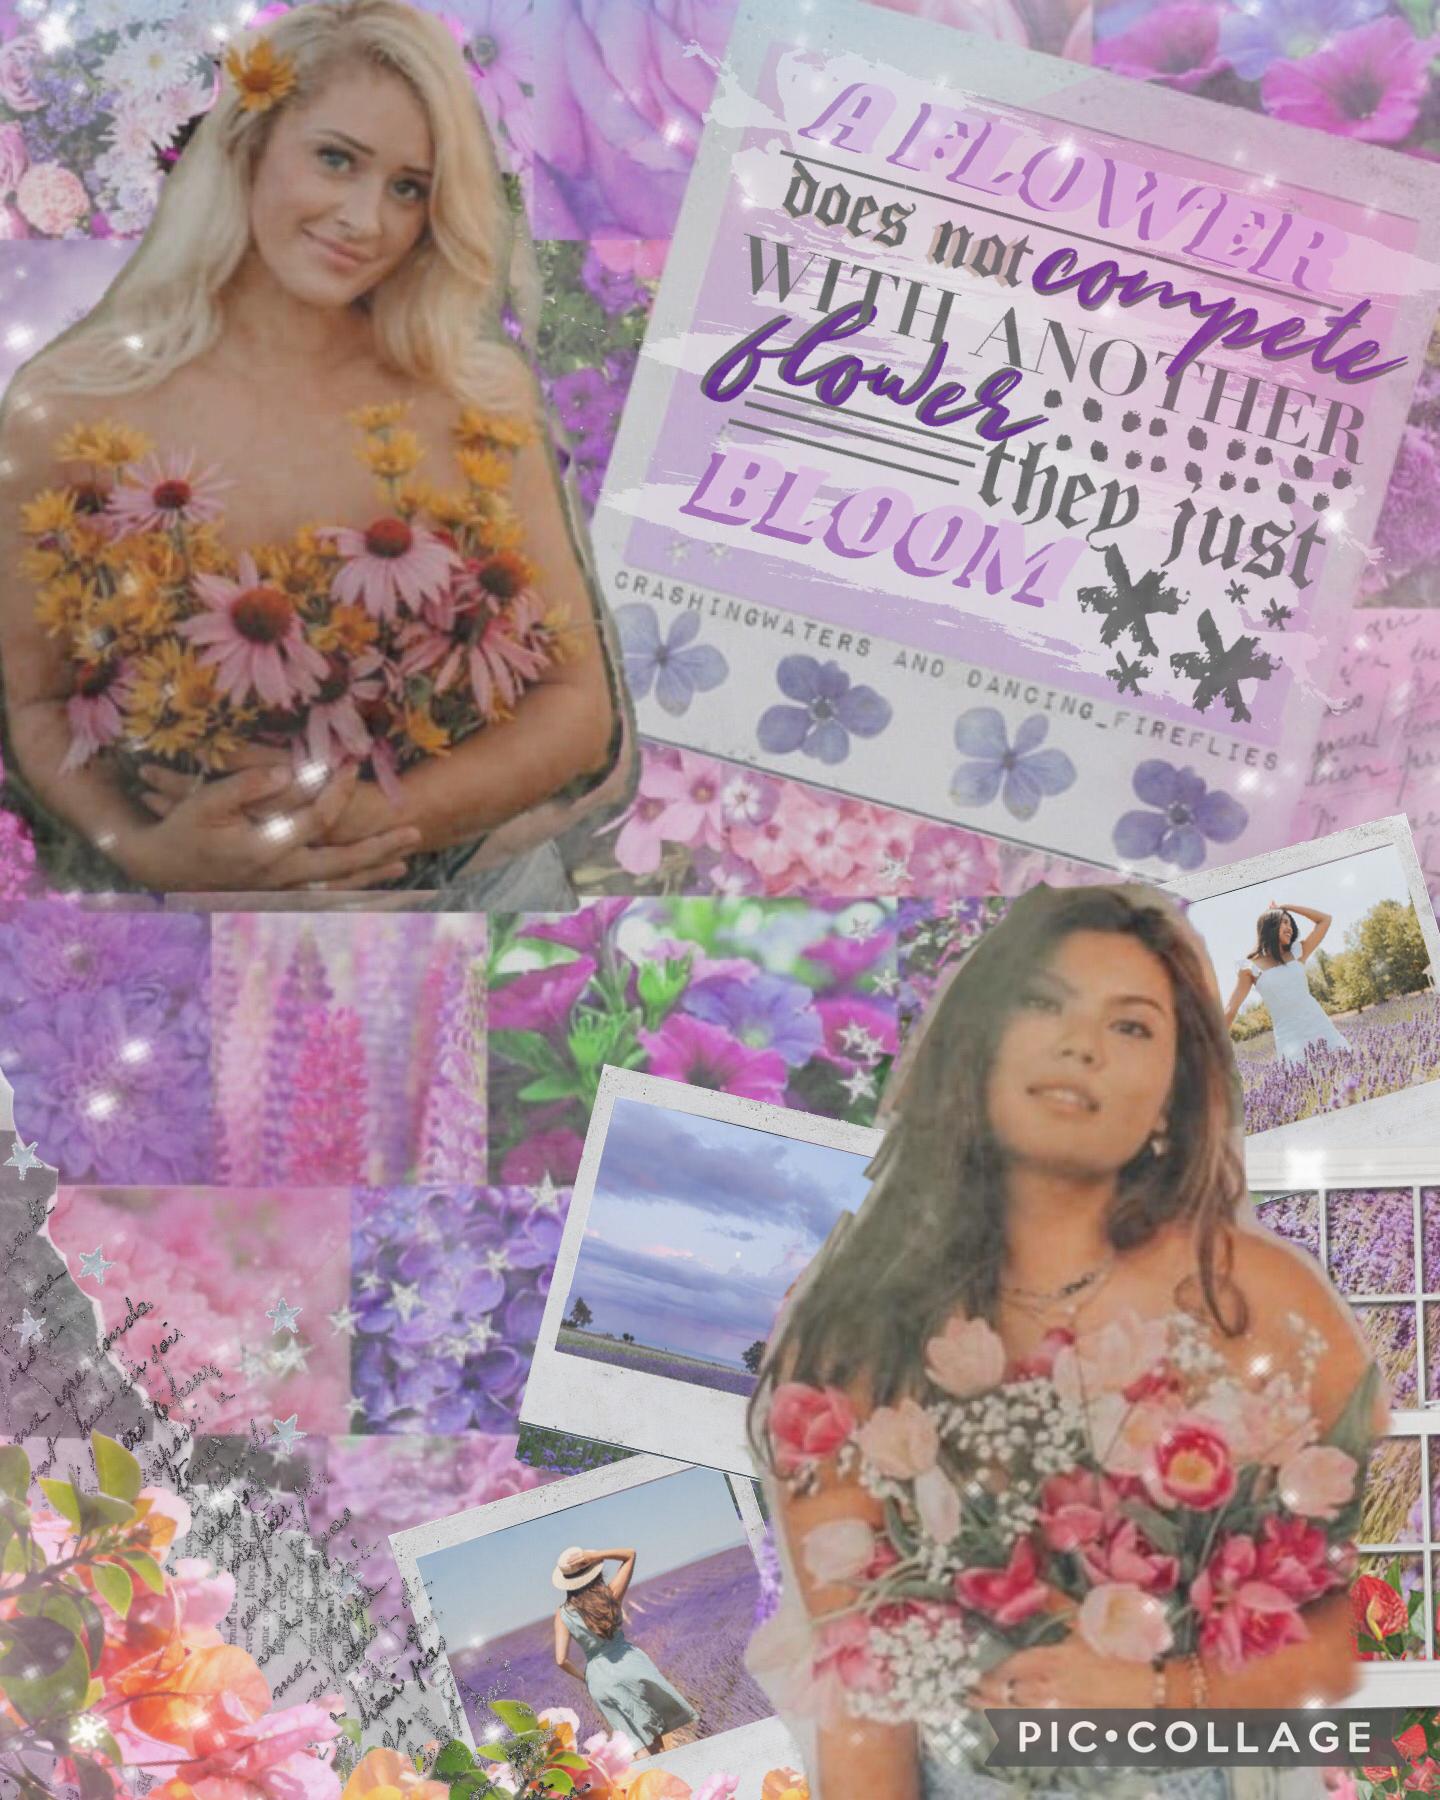 Collab with the amazing dancing_fireflies!! She did the stunning background and I did the text and editing 💗Definitely check out her beautiful account and give her a follow! 😁How are you all? I’m so glad to be back on pic collage, I missed you all ❤️